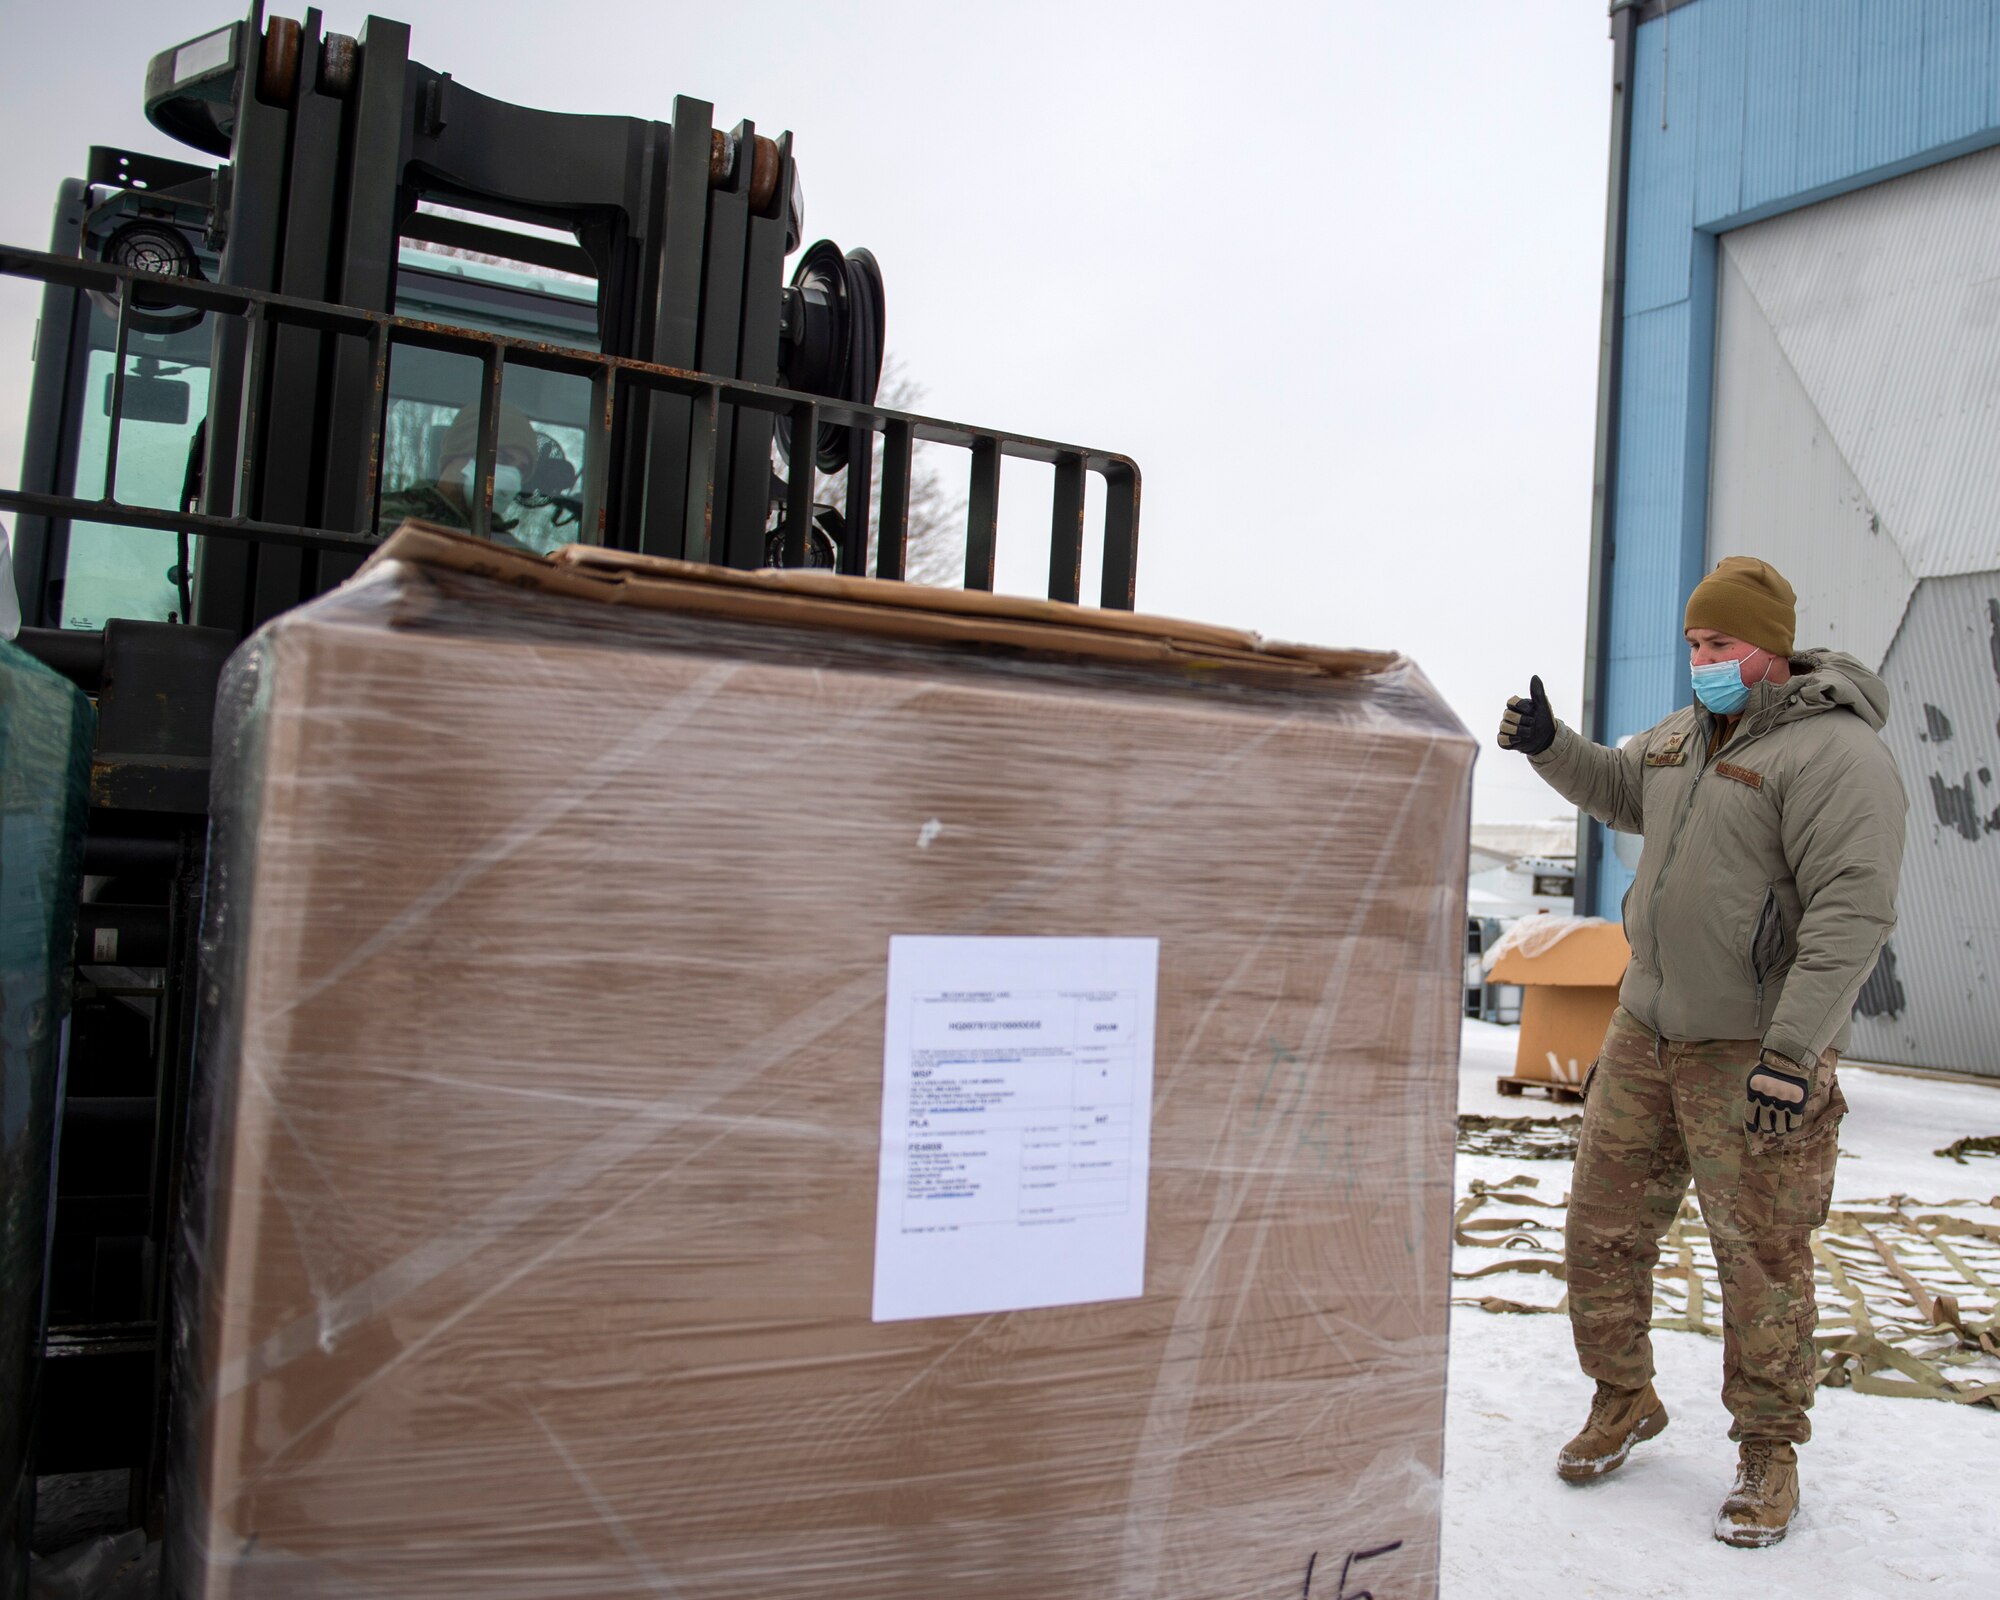 U.S. Air Force Staff Sgt. Jacob Mueller, Air Transportation Specialist with the 133rd Air Transportation Function, marshals the forklift during pallet buildup in St. Paul, Minn., Jan. 08, 2022.